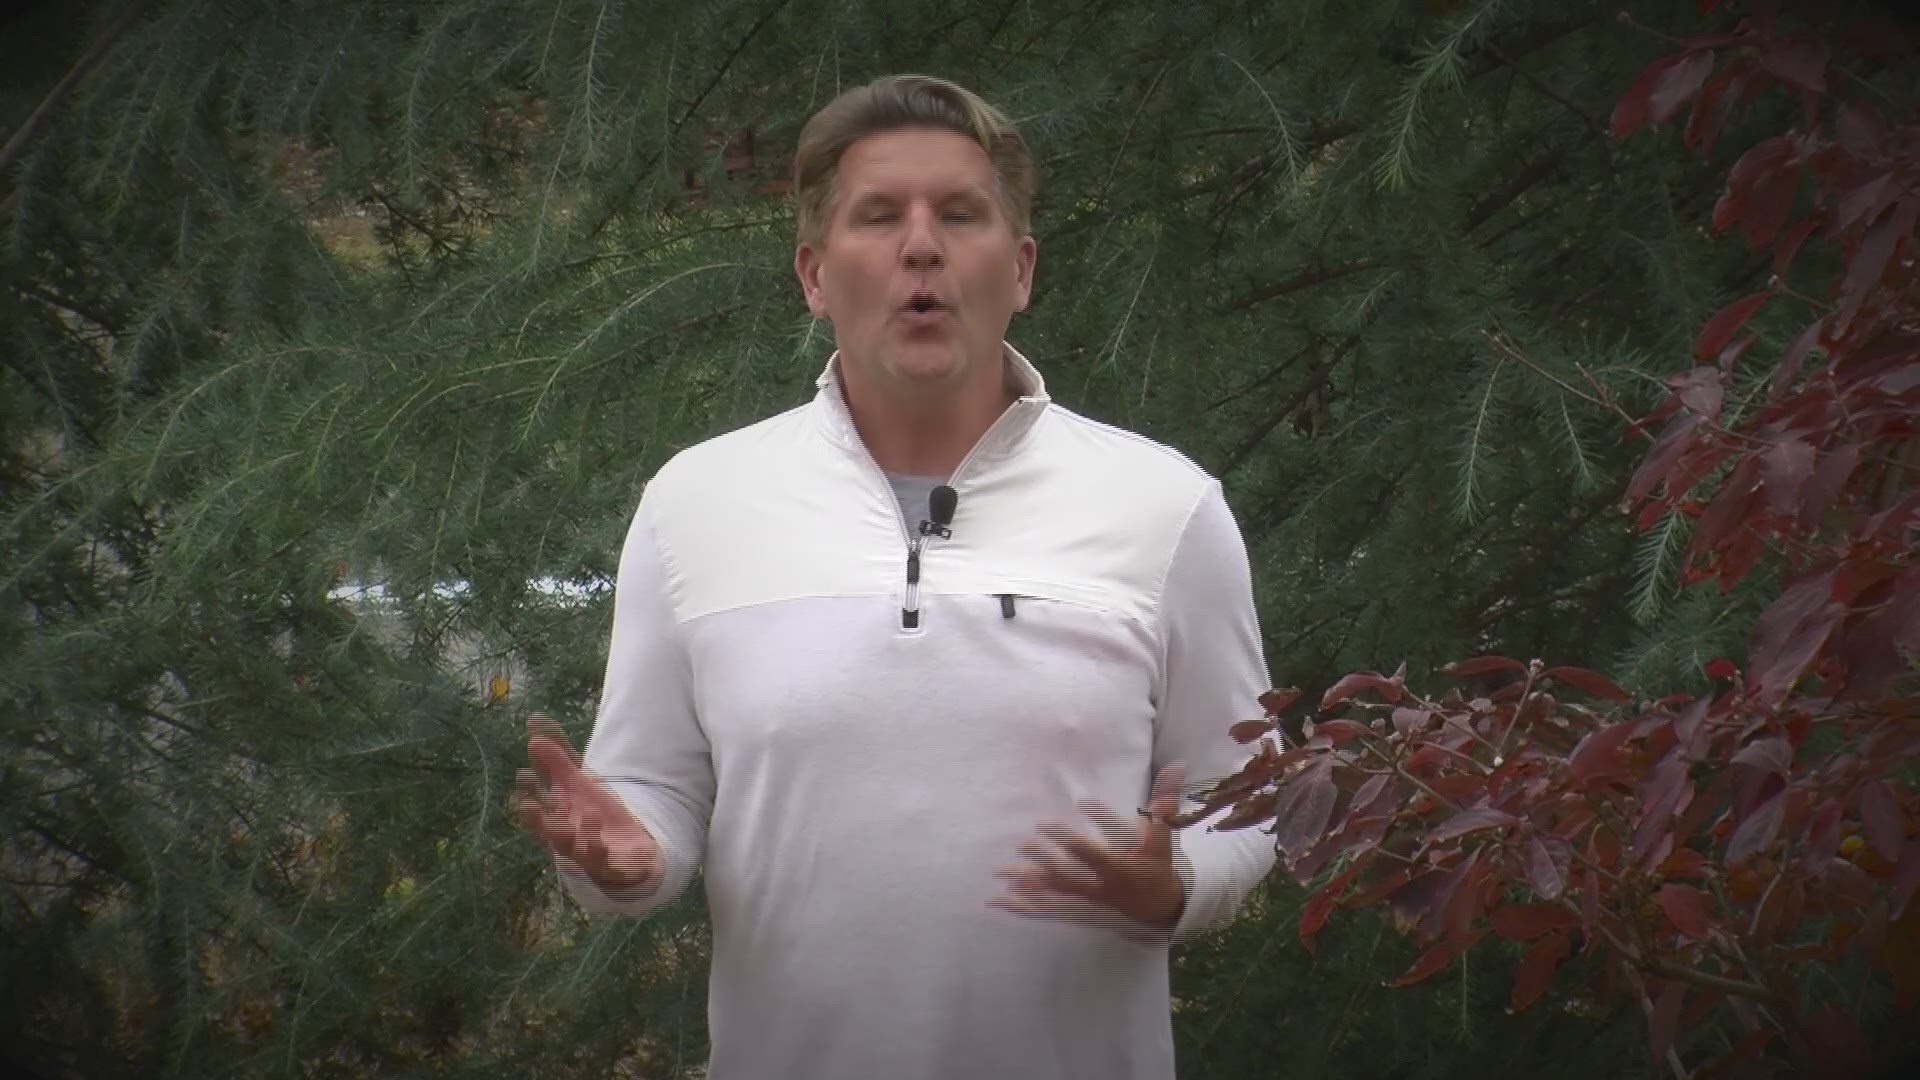 Chris H. Olsen tells us how to brighten our landscape during the winter with evergreen trees and shrubs in this episode of Today's Home.